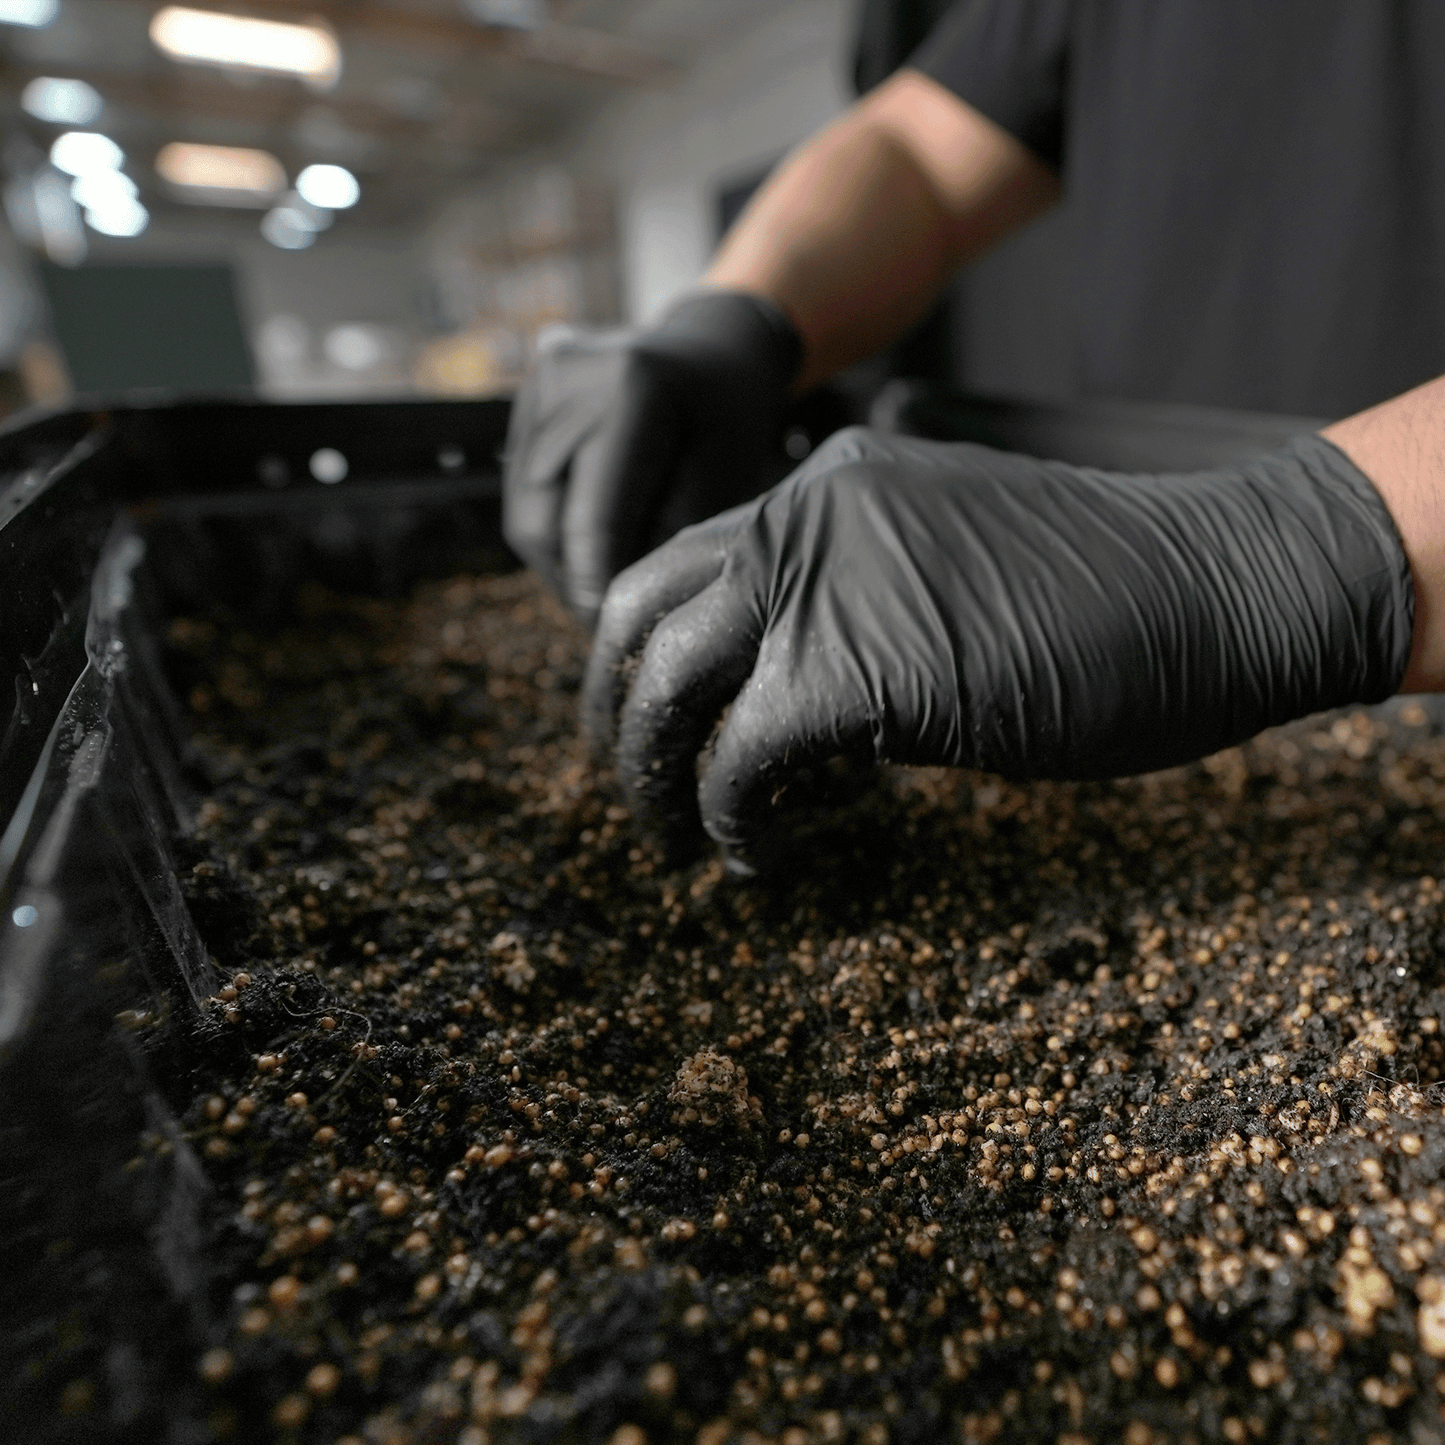 Close-up of the substrate mix, highlighting the variety of particles and the moist texture indicating readiness for use.